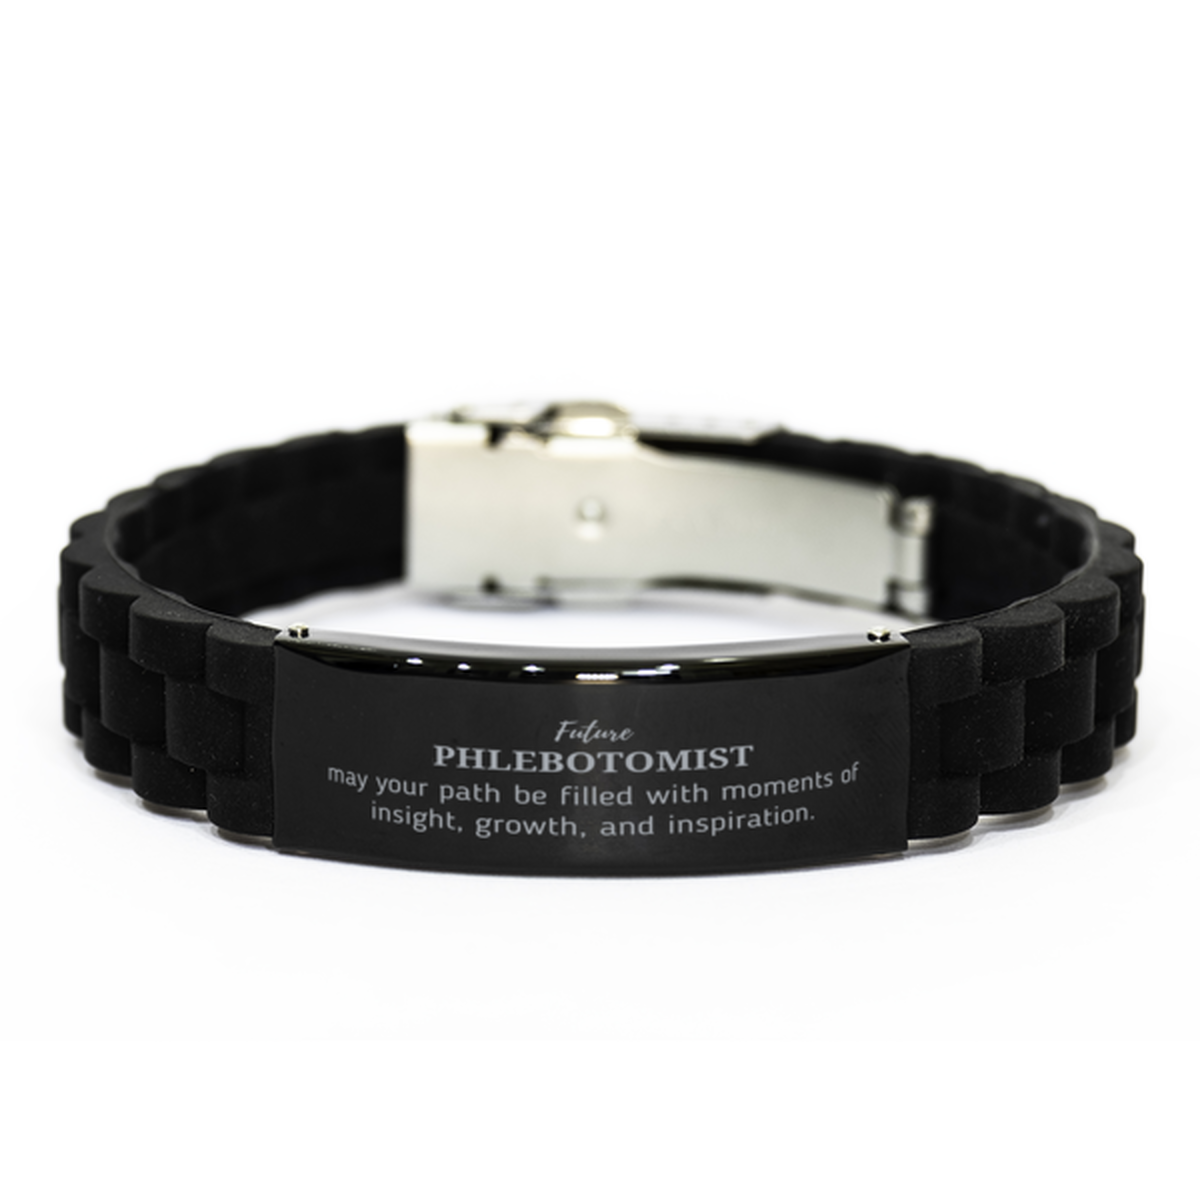 Future Phlebotomist Gifts, May your path be filled with moments of insight, Graduation Gifts for New Phlebotomist, Christmas Unique Black Glidelock Clasp Bracelet For Men, Women, Friends